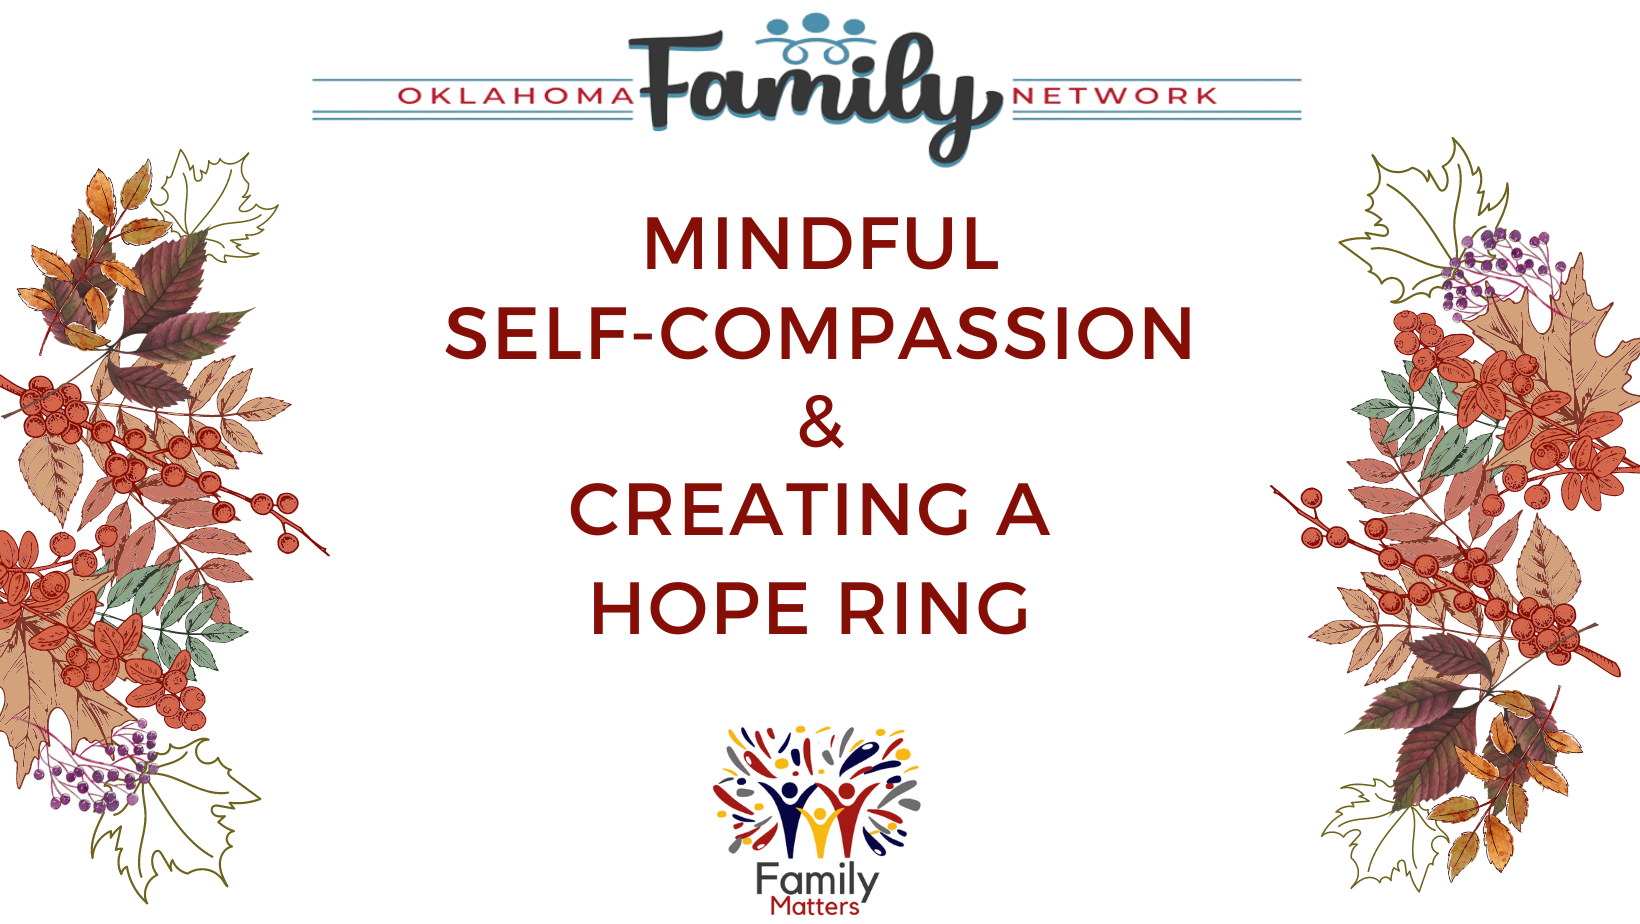 Mindful Self-Compassion and Creating a Hope Ring